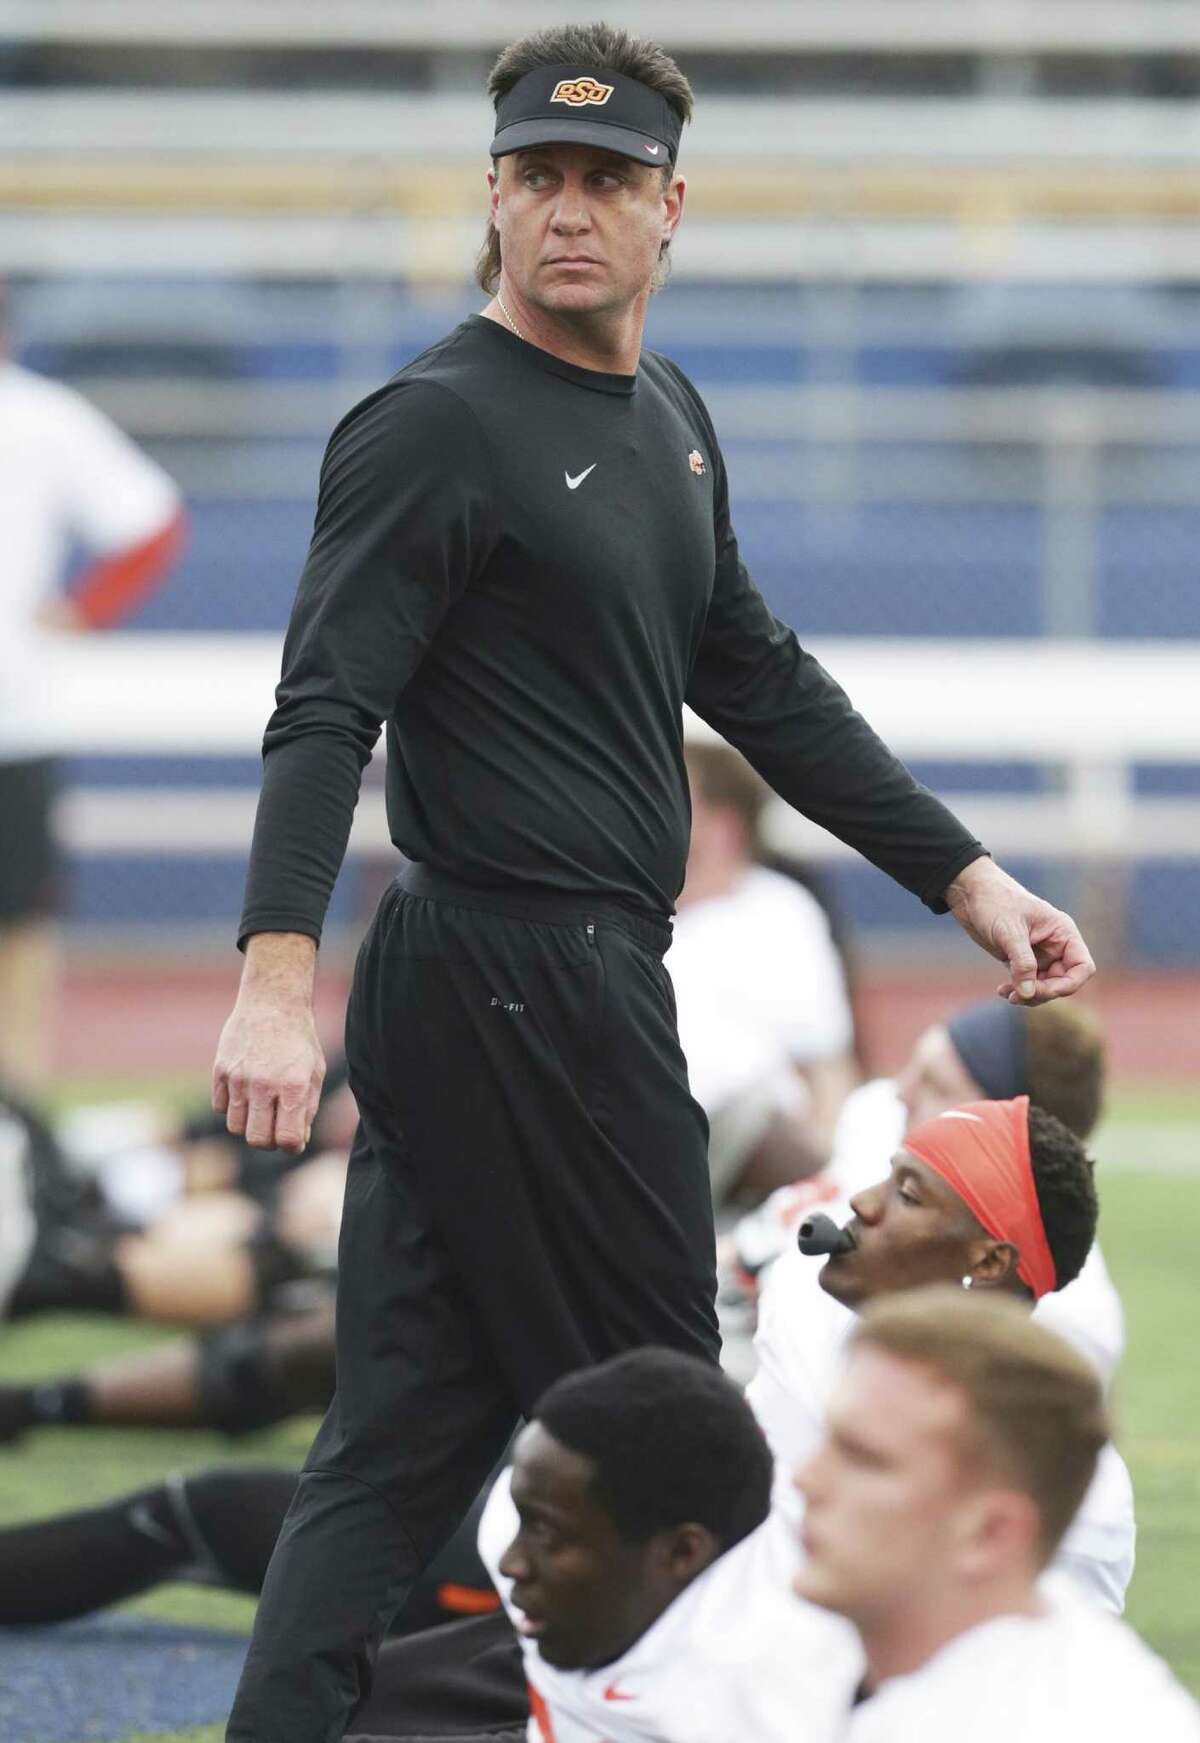 Oklahoma State coach Mike Gundy's mullet is magical